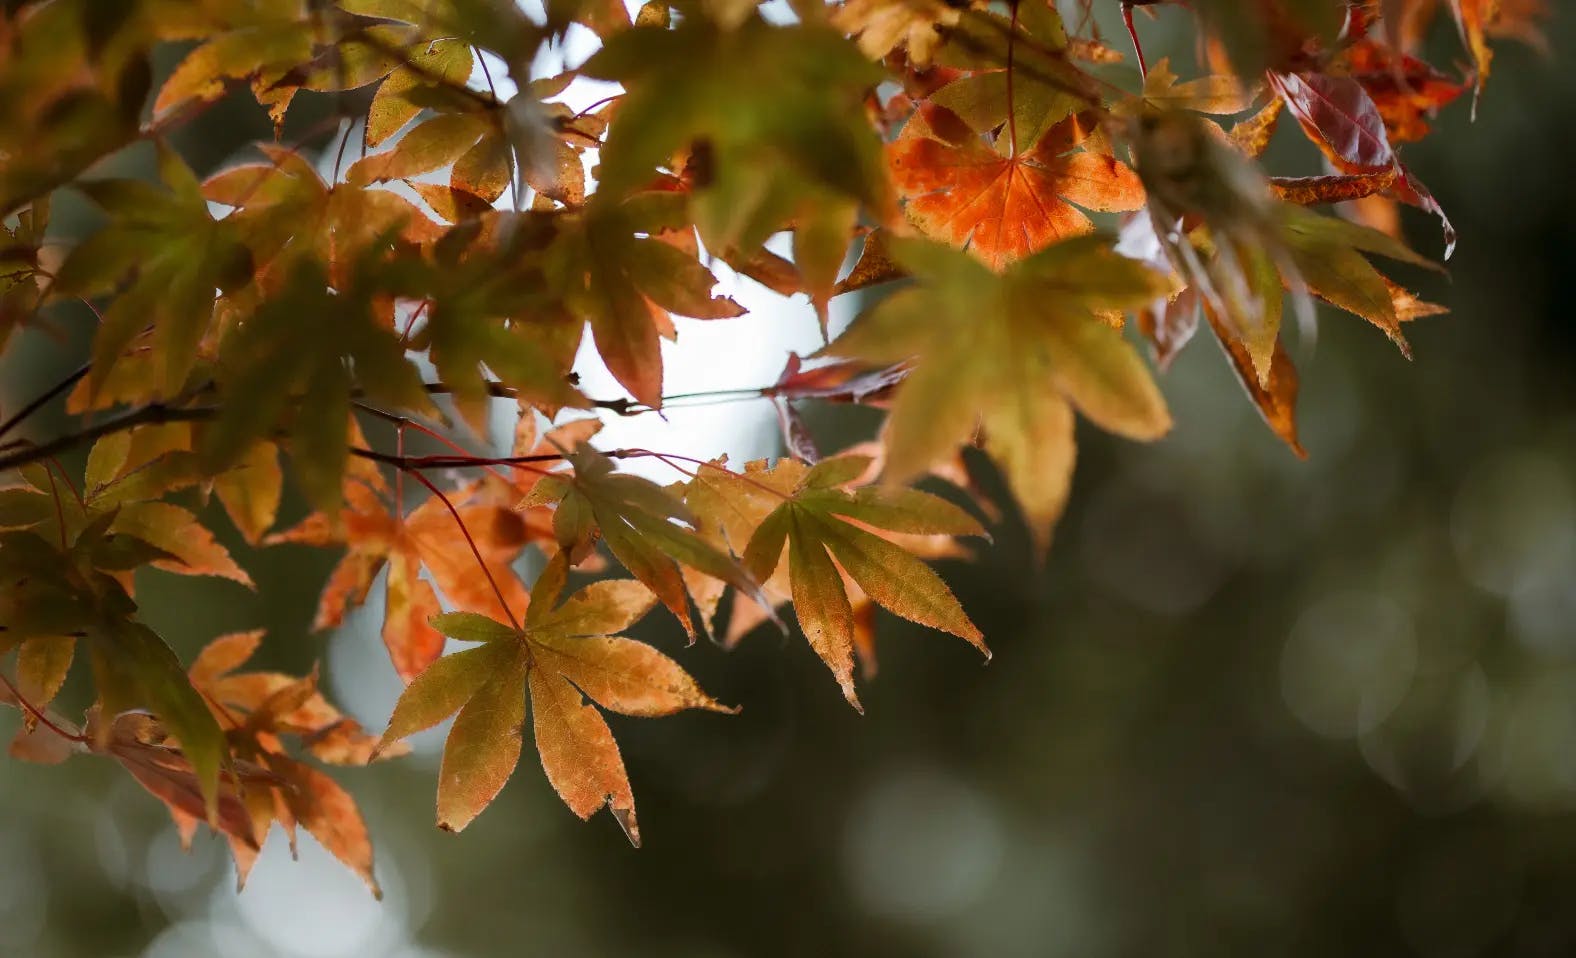 Close-up of autumn leaves on a tree. The foliage shows a mix of green and orange colors, indicating the change of seasons. The background is out of focus, creating a bokeh effect with light and shadows.